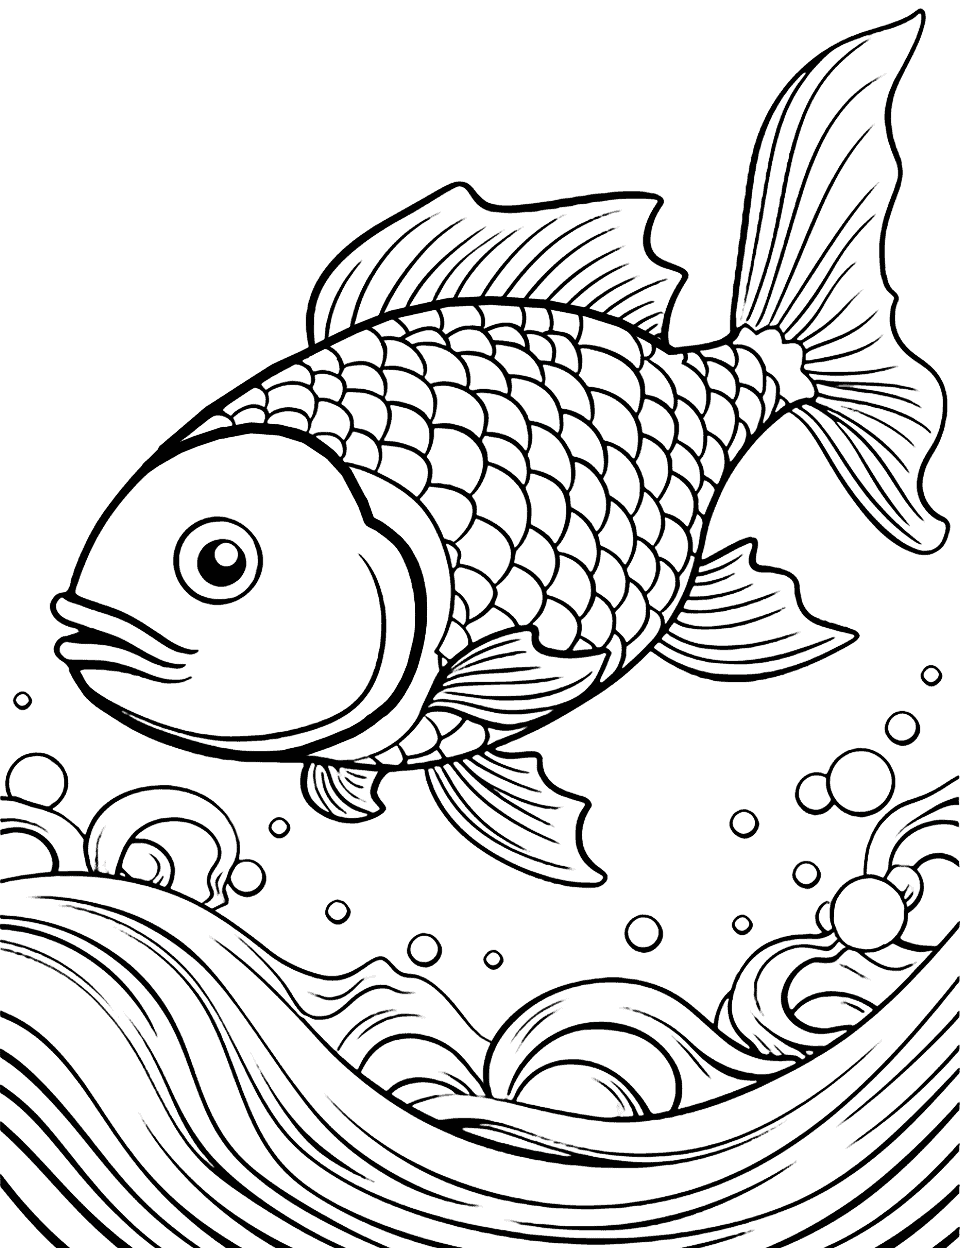 Flying Fish Above the Waves Coloring Page - Flying fish leaping out of the water, gliding gracefully in the air.